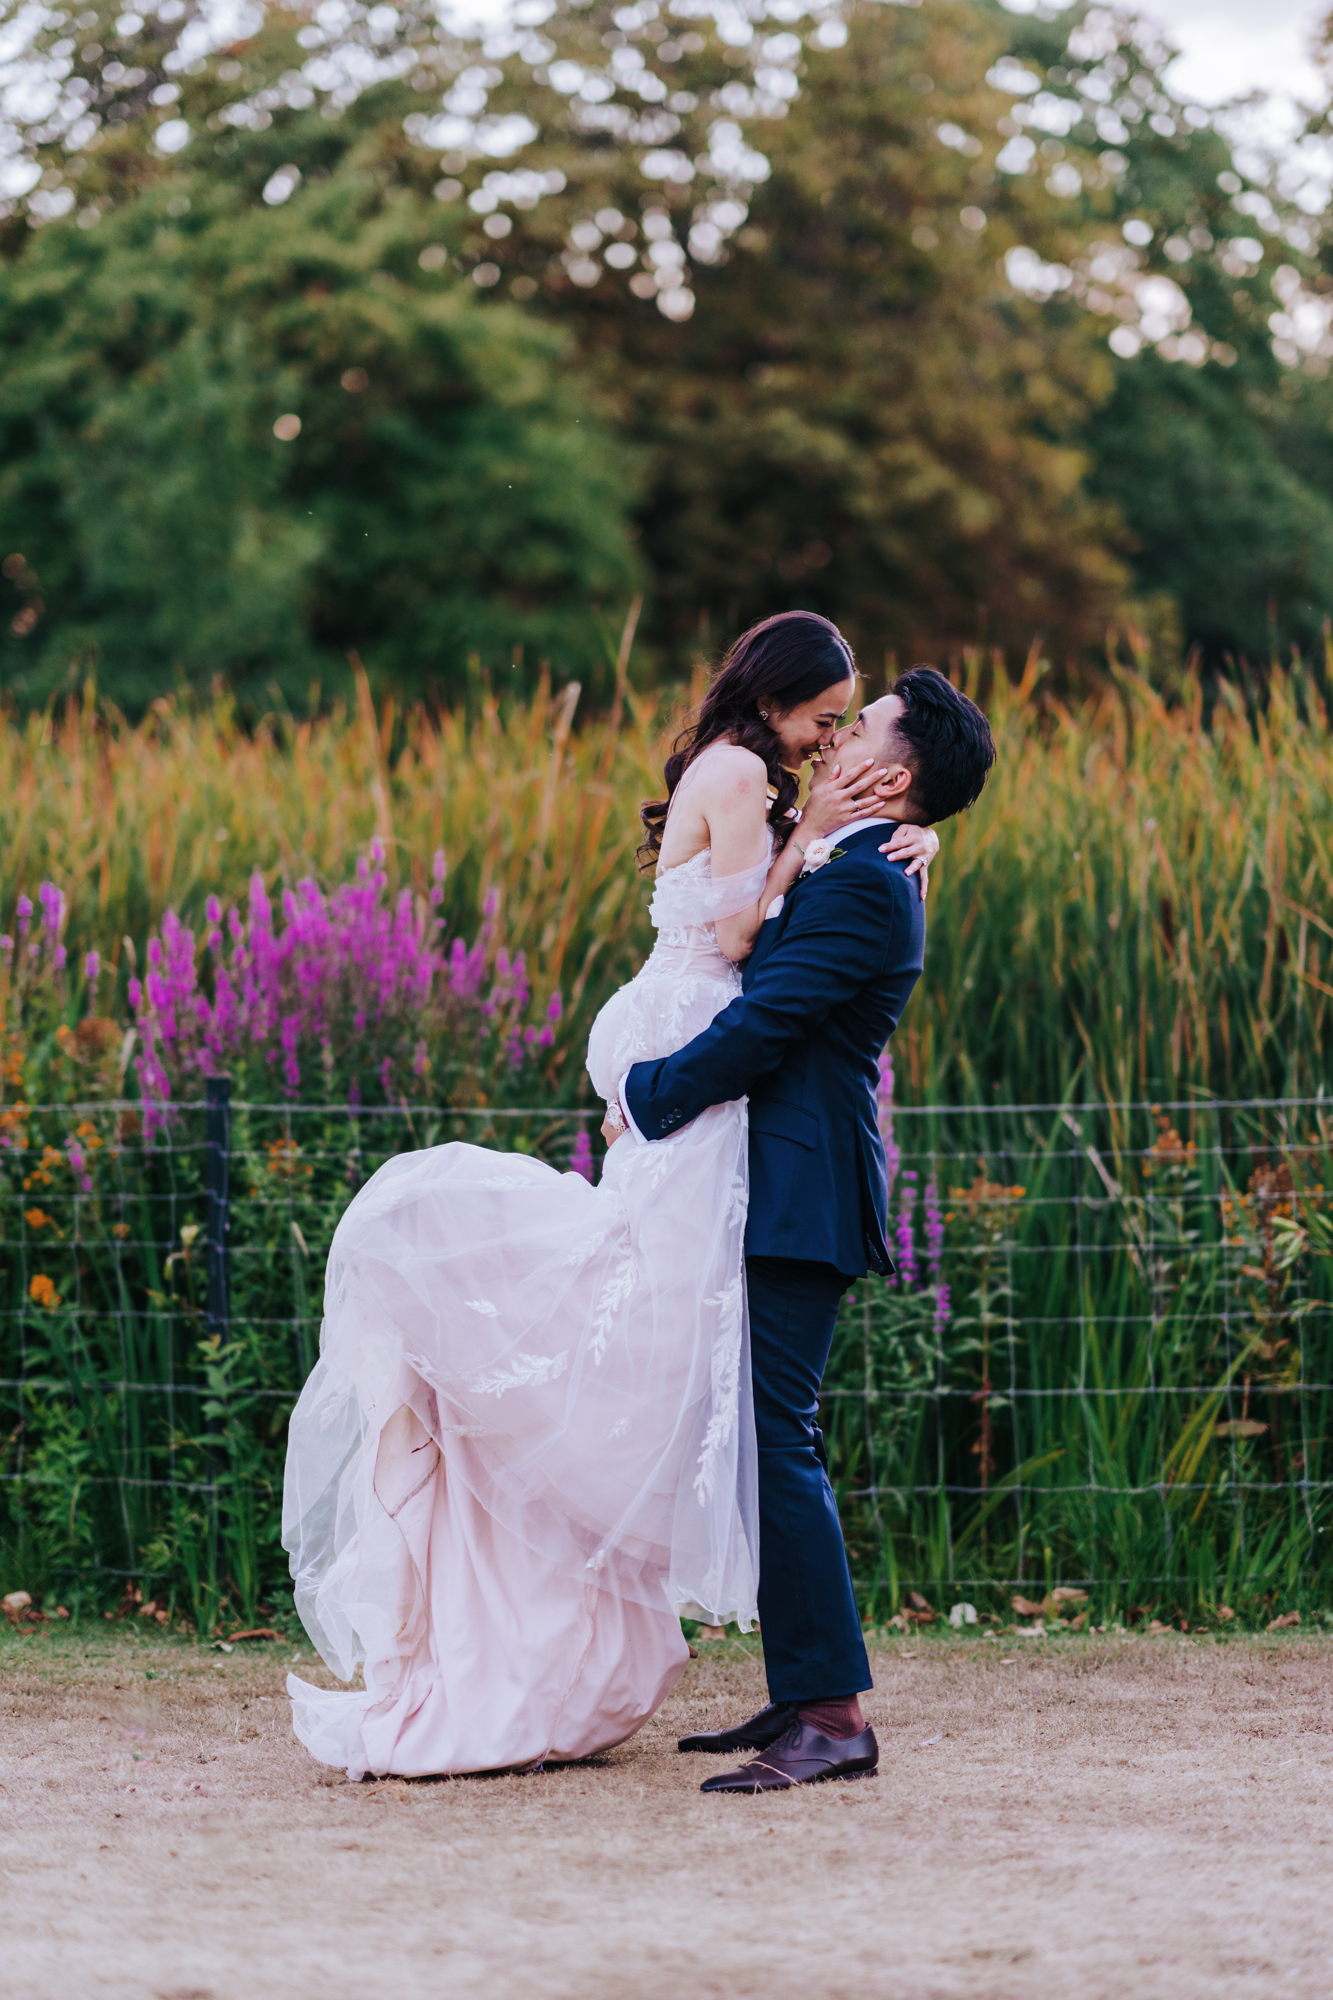 Wedding Photography Styles: The Complete Guide